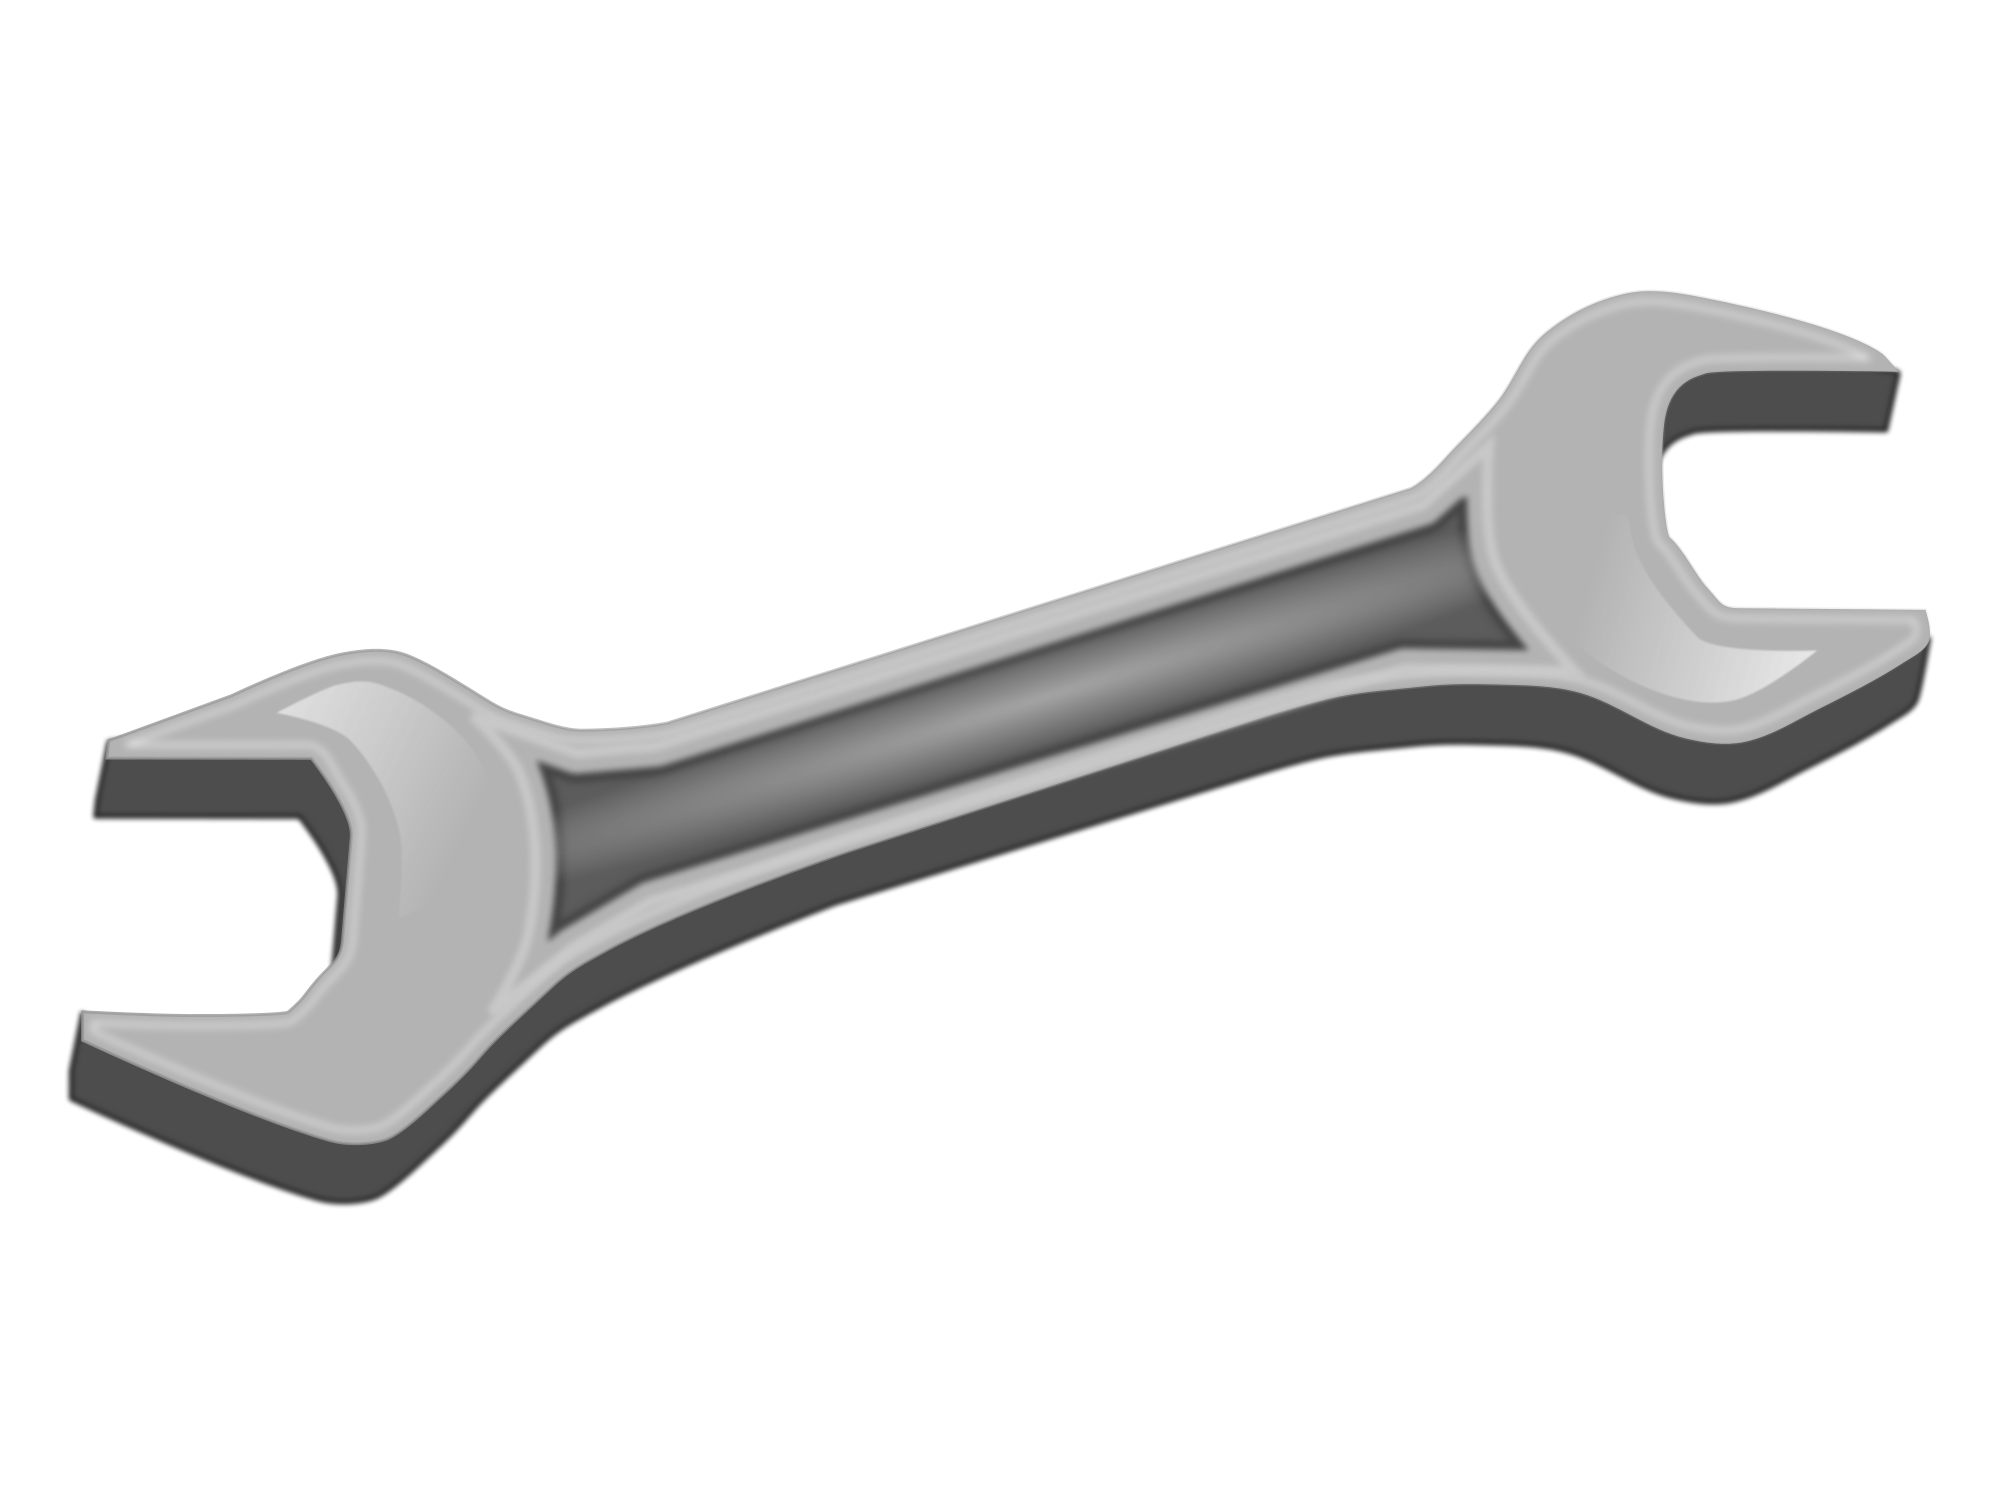 Wrench | Spanner